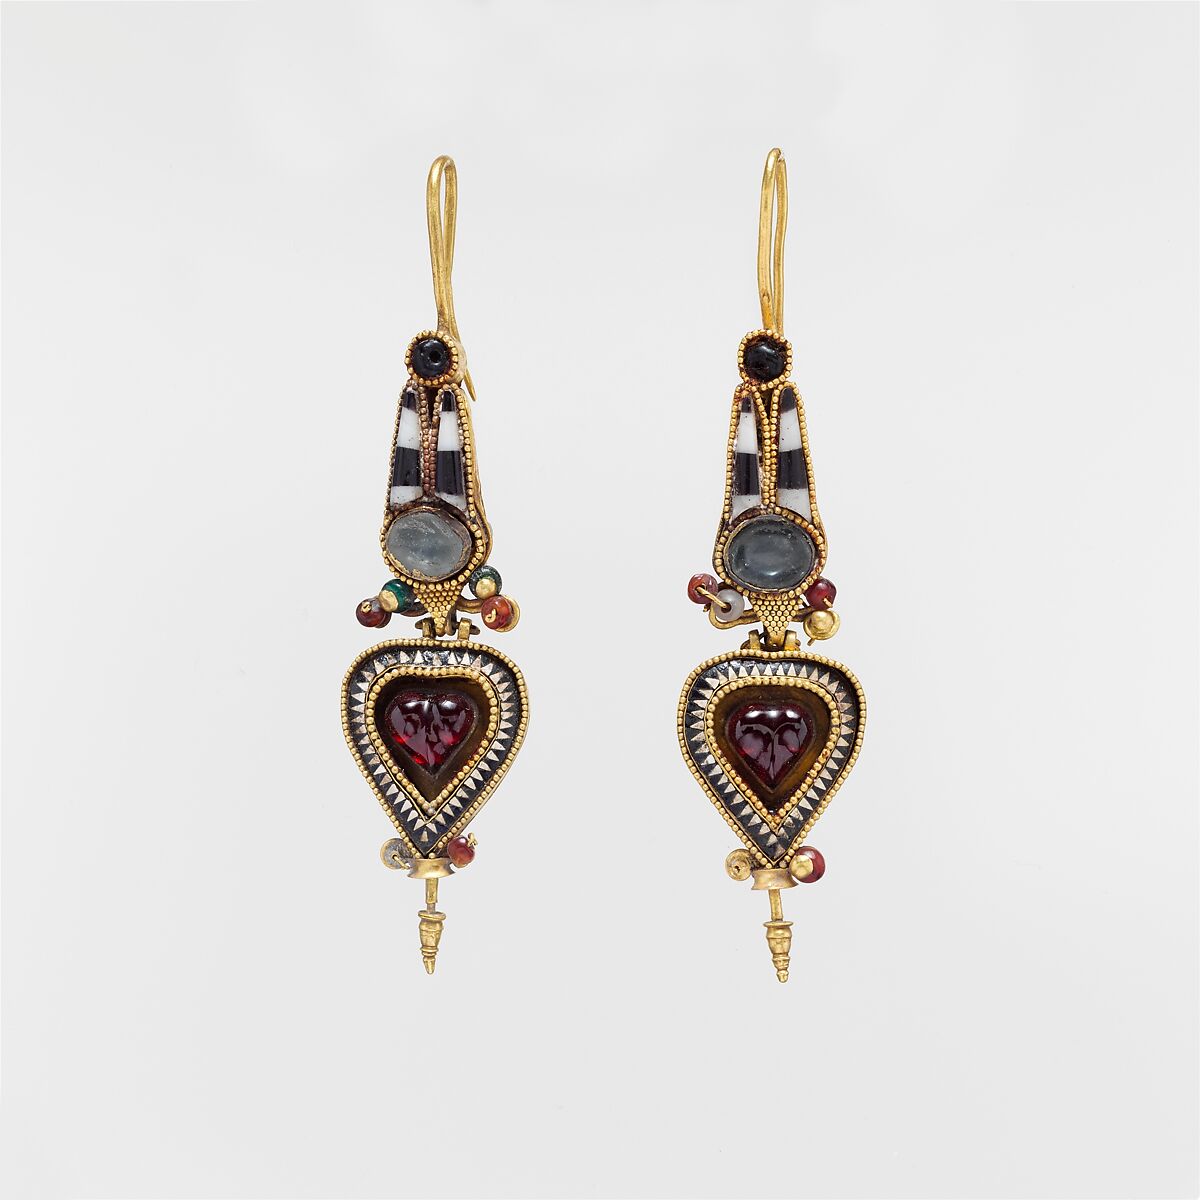 Pair of gold earrings with an Egyptian Atef crown set with stones and glass